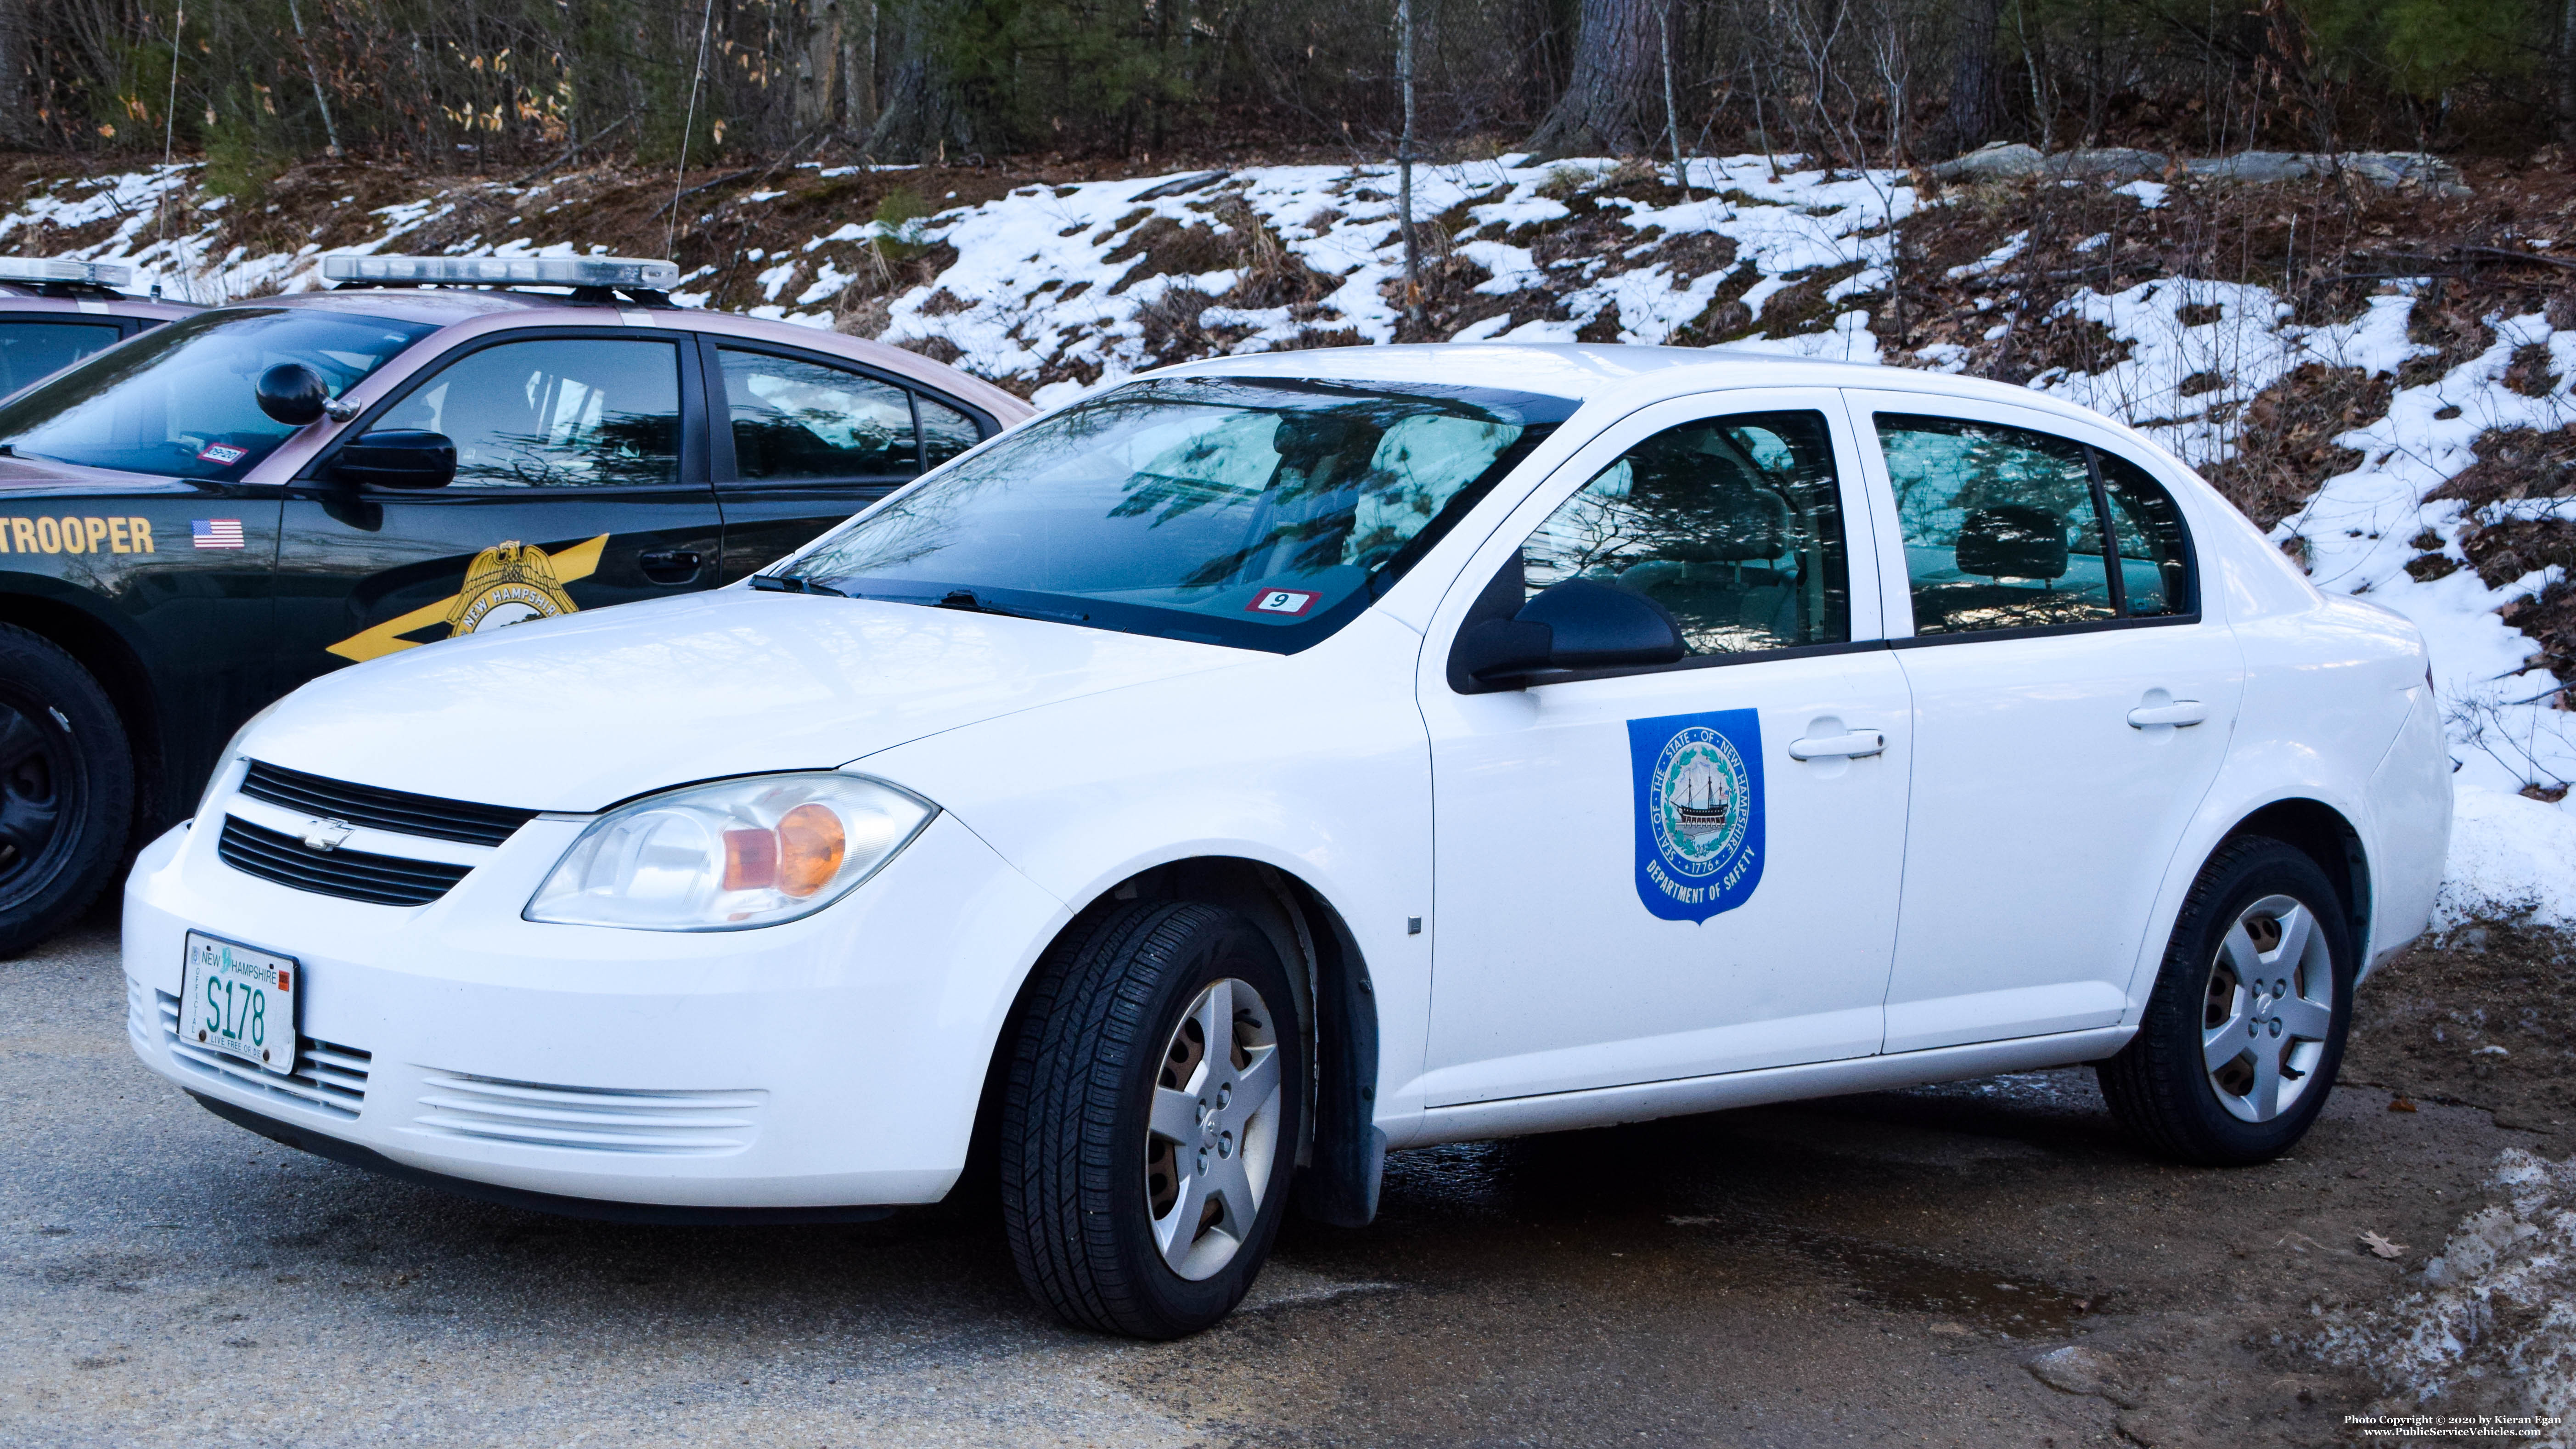 A photo  of New Hampshire Department of Safety
            Car 178, a 2005-2010 Chevrolet Cobalt             taken by Kieran Egan